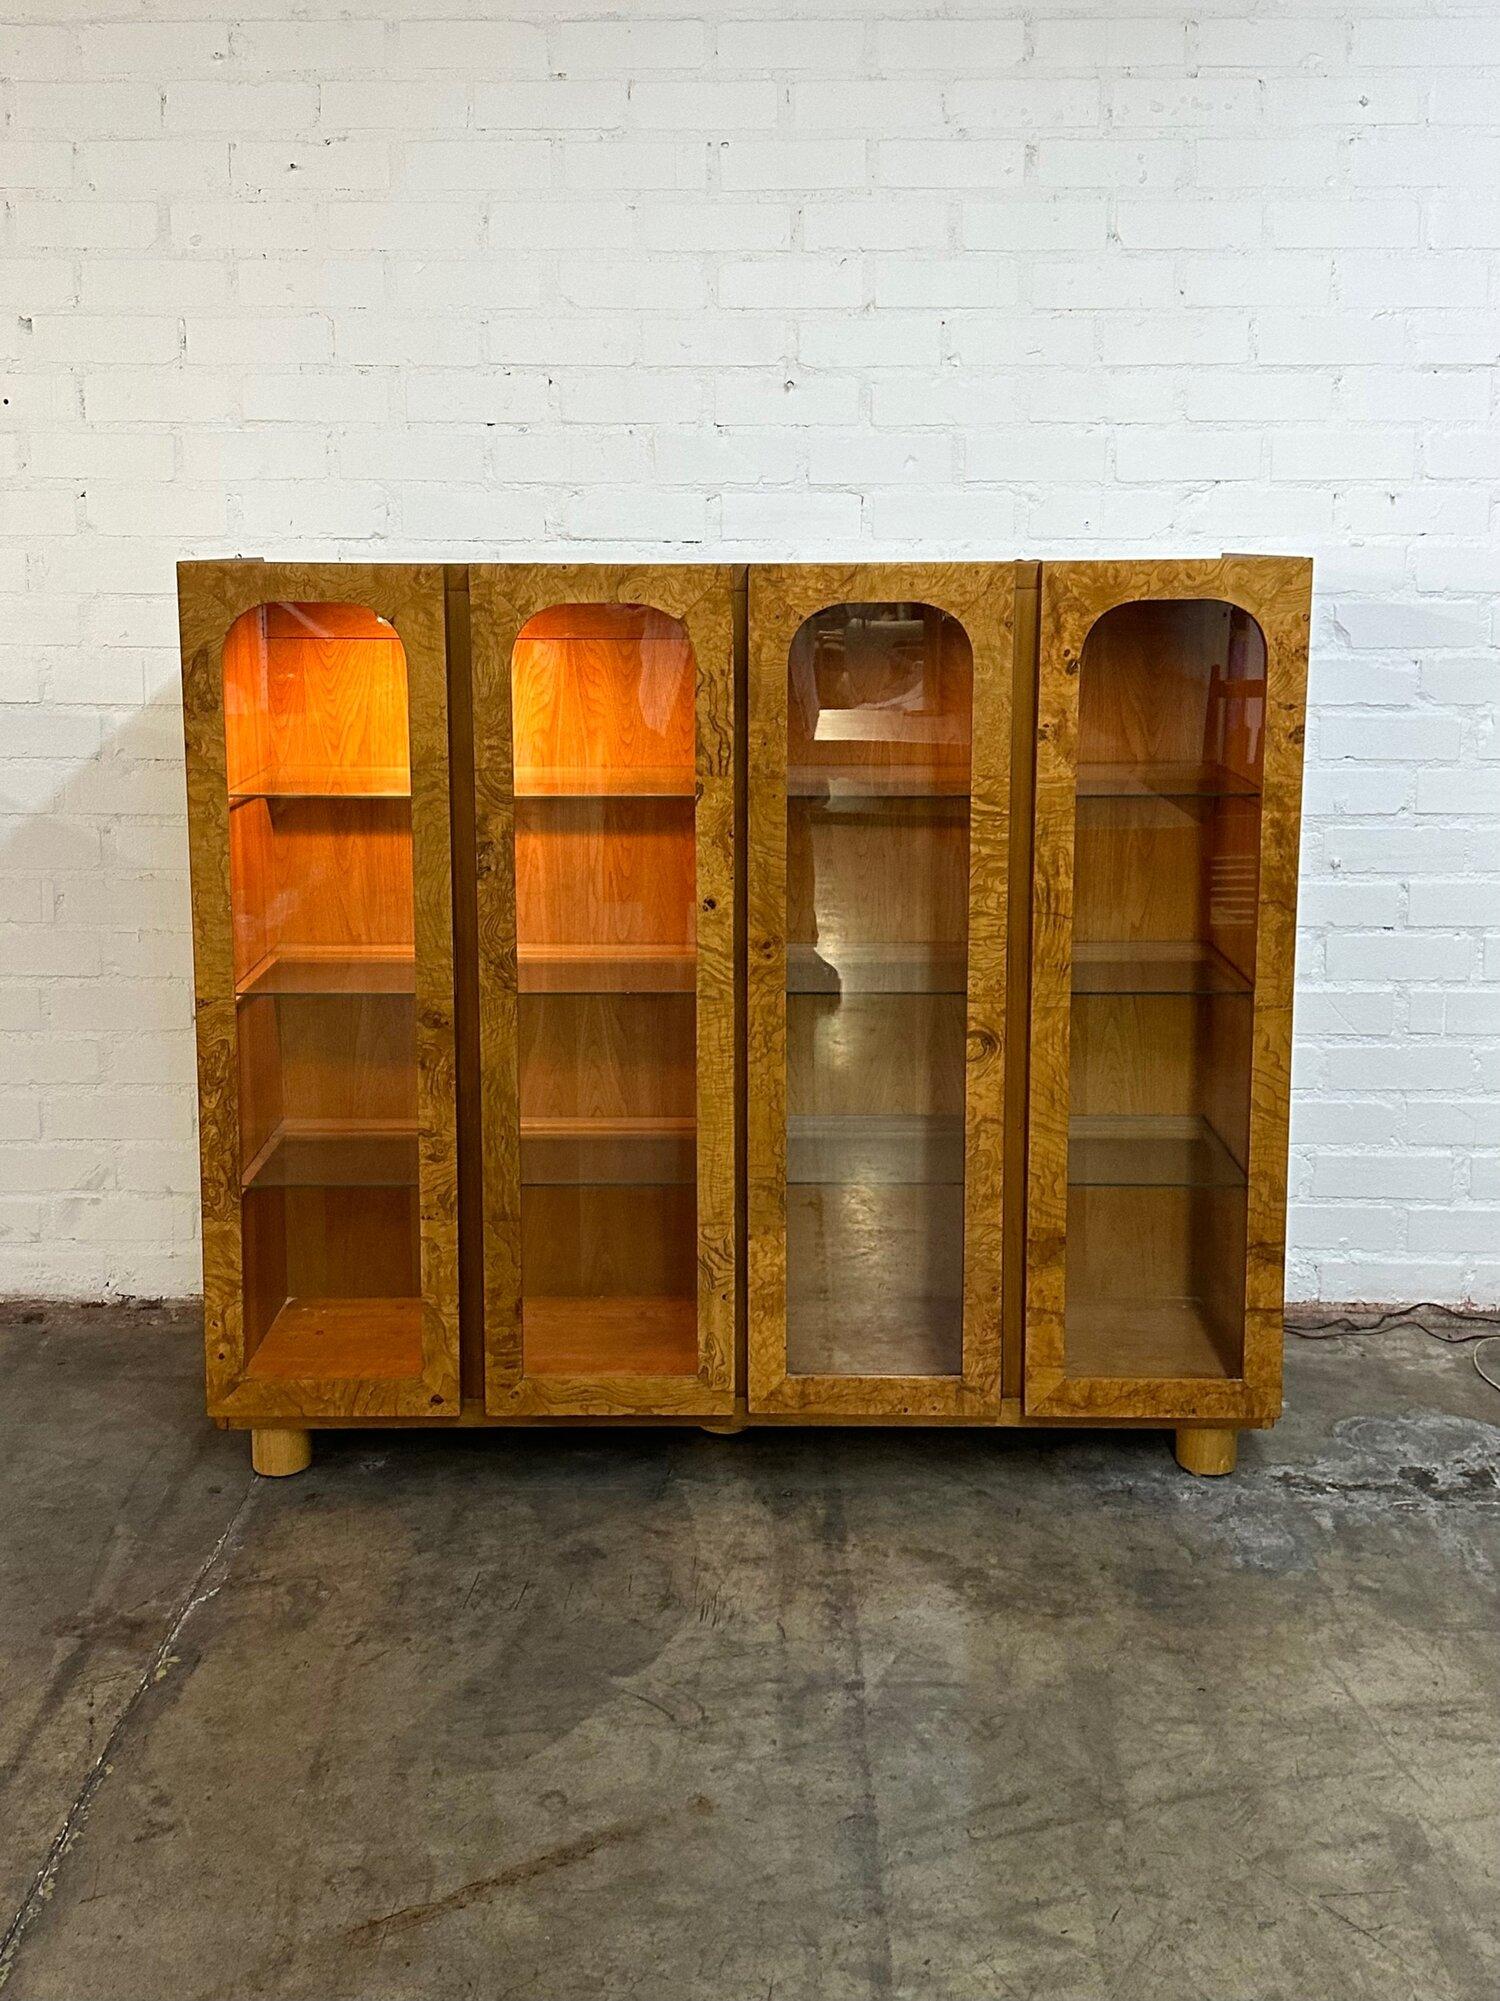 W64 D17 H56

Bookcases in good vintage condition. Item features nice curved center glass doors, well preserved Burl wood veneer , and rounded solid oak cylinder legs. The lights inside are fully functional but the right side bulb is fading and